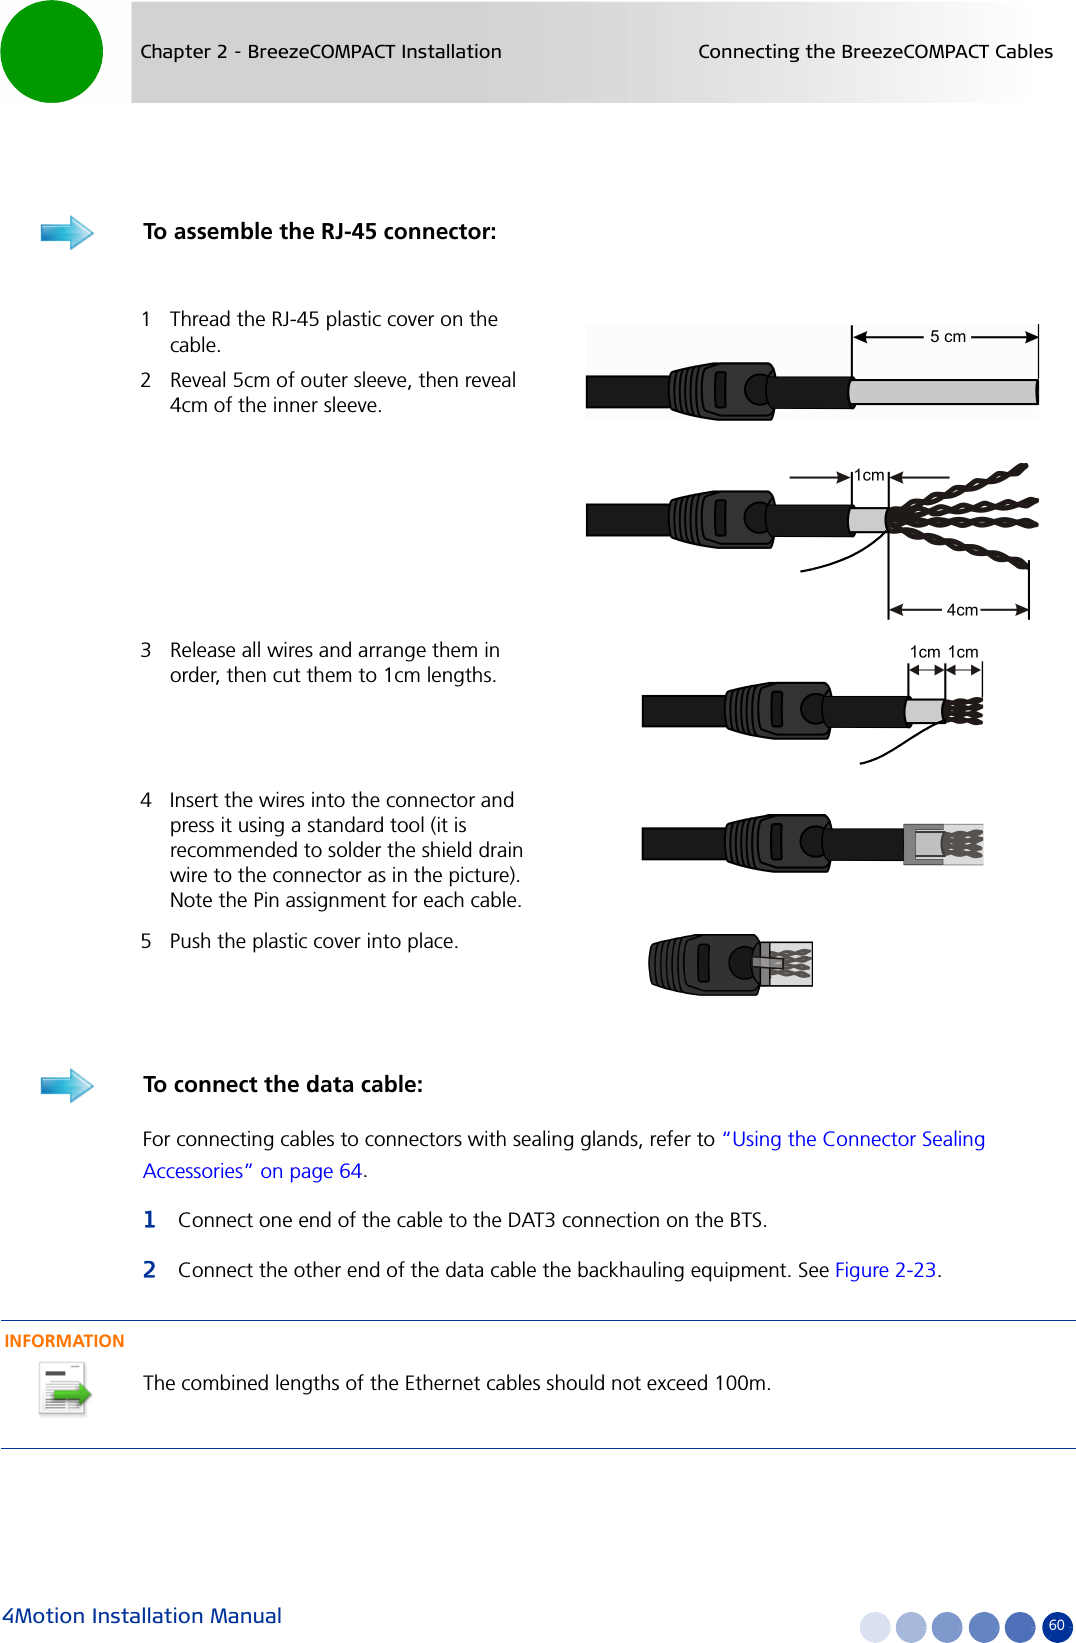 4Motion Installation Manual 60Chapter 2 - BreezeCOMPACT Installation Connecting the BreezeCOMPACT CablesFor connecting cables to connectors with sealing glands, refer to “Using the Connector Sealing Accessories” on page 64.1Connect one end of the cable to the DAT3 connection on the BTS.2Connect the other end of the data cable the backhauling equipment. See Figure 2-23.To assemble the RJ-45 connector:1 Thread the RJ-45 plastic cover on the cable.2 Reveal 5cm of outer sleeve, then reveal 4cm of the inner sleeve.3 Release all wires and arrange them in order, then cut them to 1cm lengths.4 Insert the wires into the connector and press it using a standard tool (it is recommended to solder the shield drain wire to the connector as in the picture). Note the Pin assignment for each cable.5 Push the plastic cover into place.To connect the data cable:INFORMATIONThe combined lengths of the Ethernet cables should not exceed 100m.